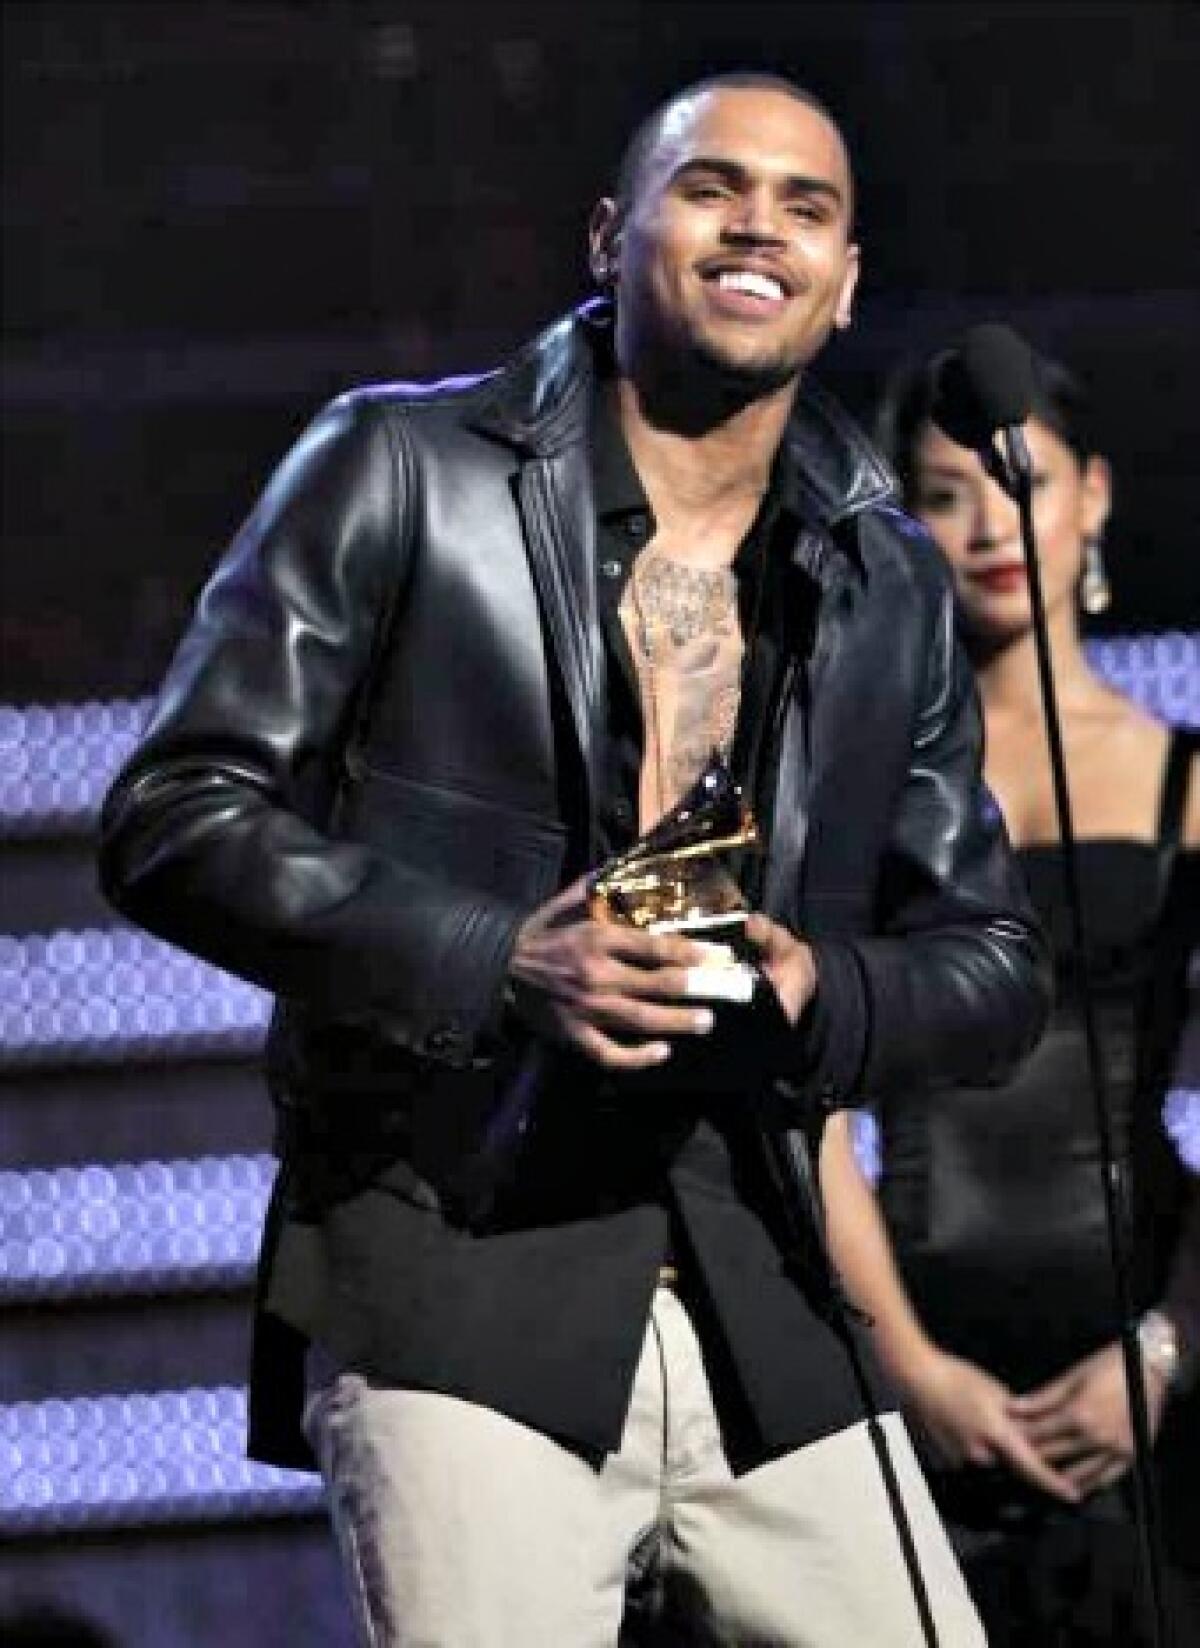 Chris Brown accepting the award for best R&B album for "F.A.M.E." during the 54th annual Grammy Awards in Los Angeles.